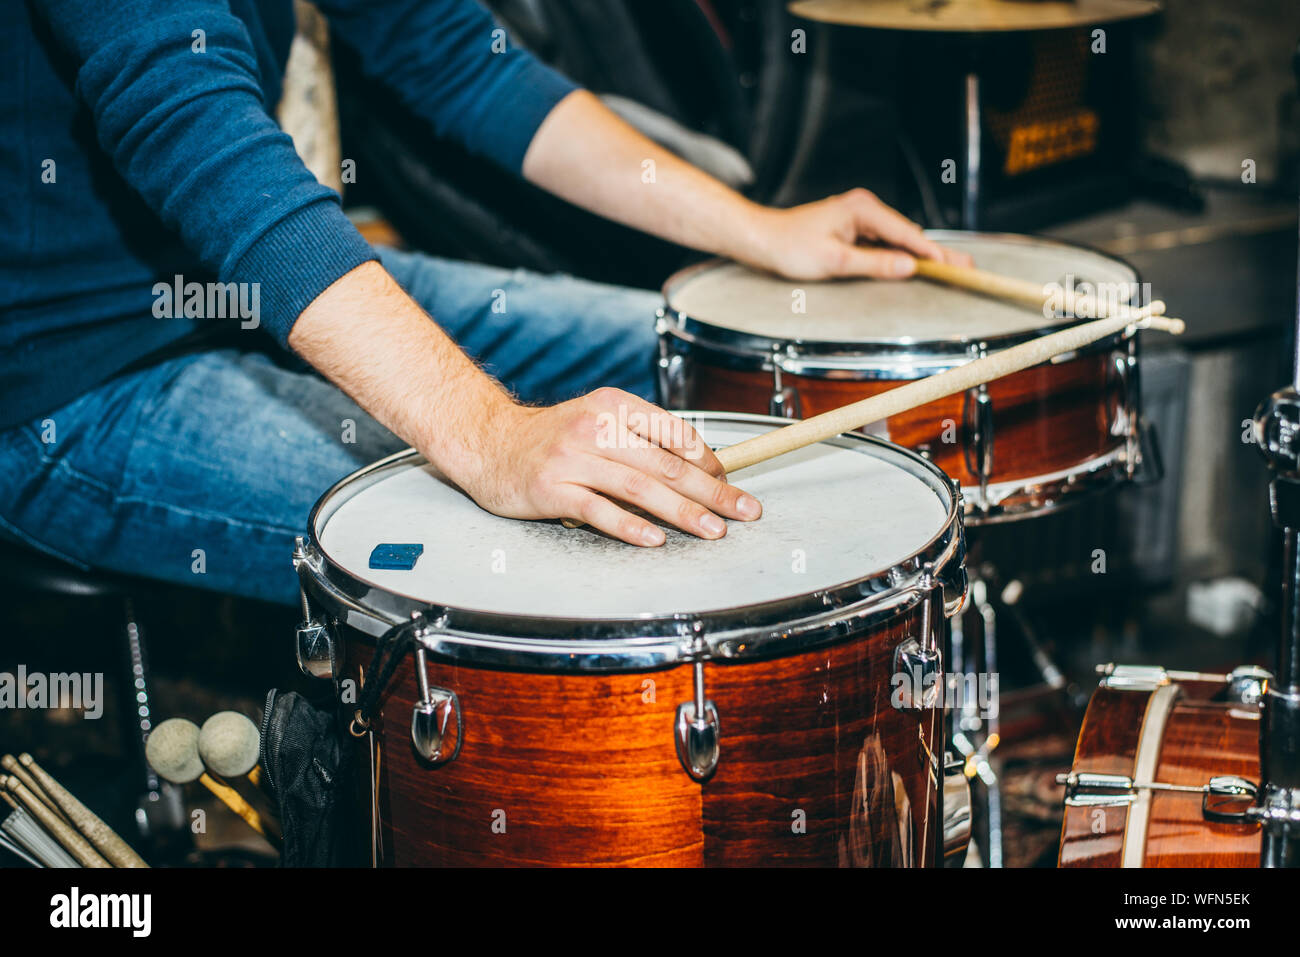 Midsection Of Man Playing Drums At Music Concert Stock Photo